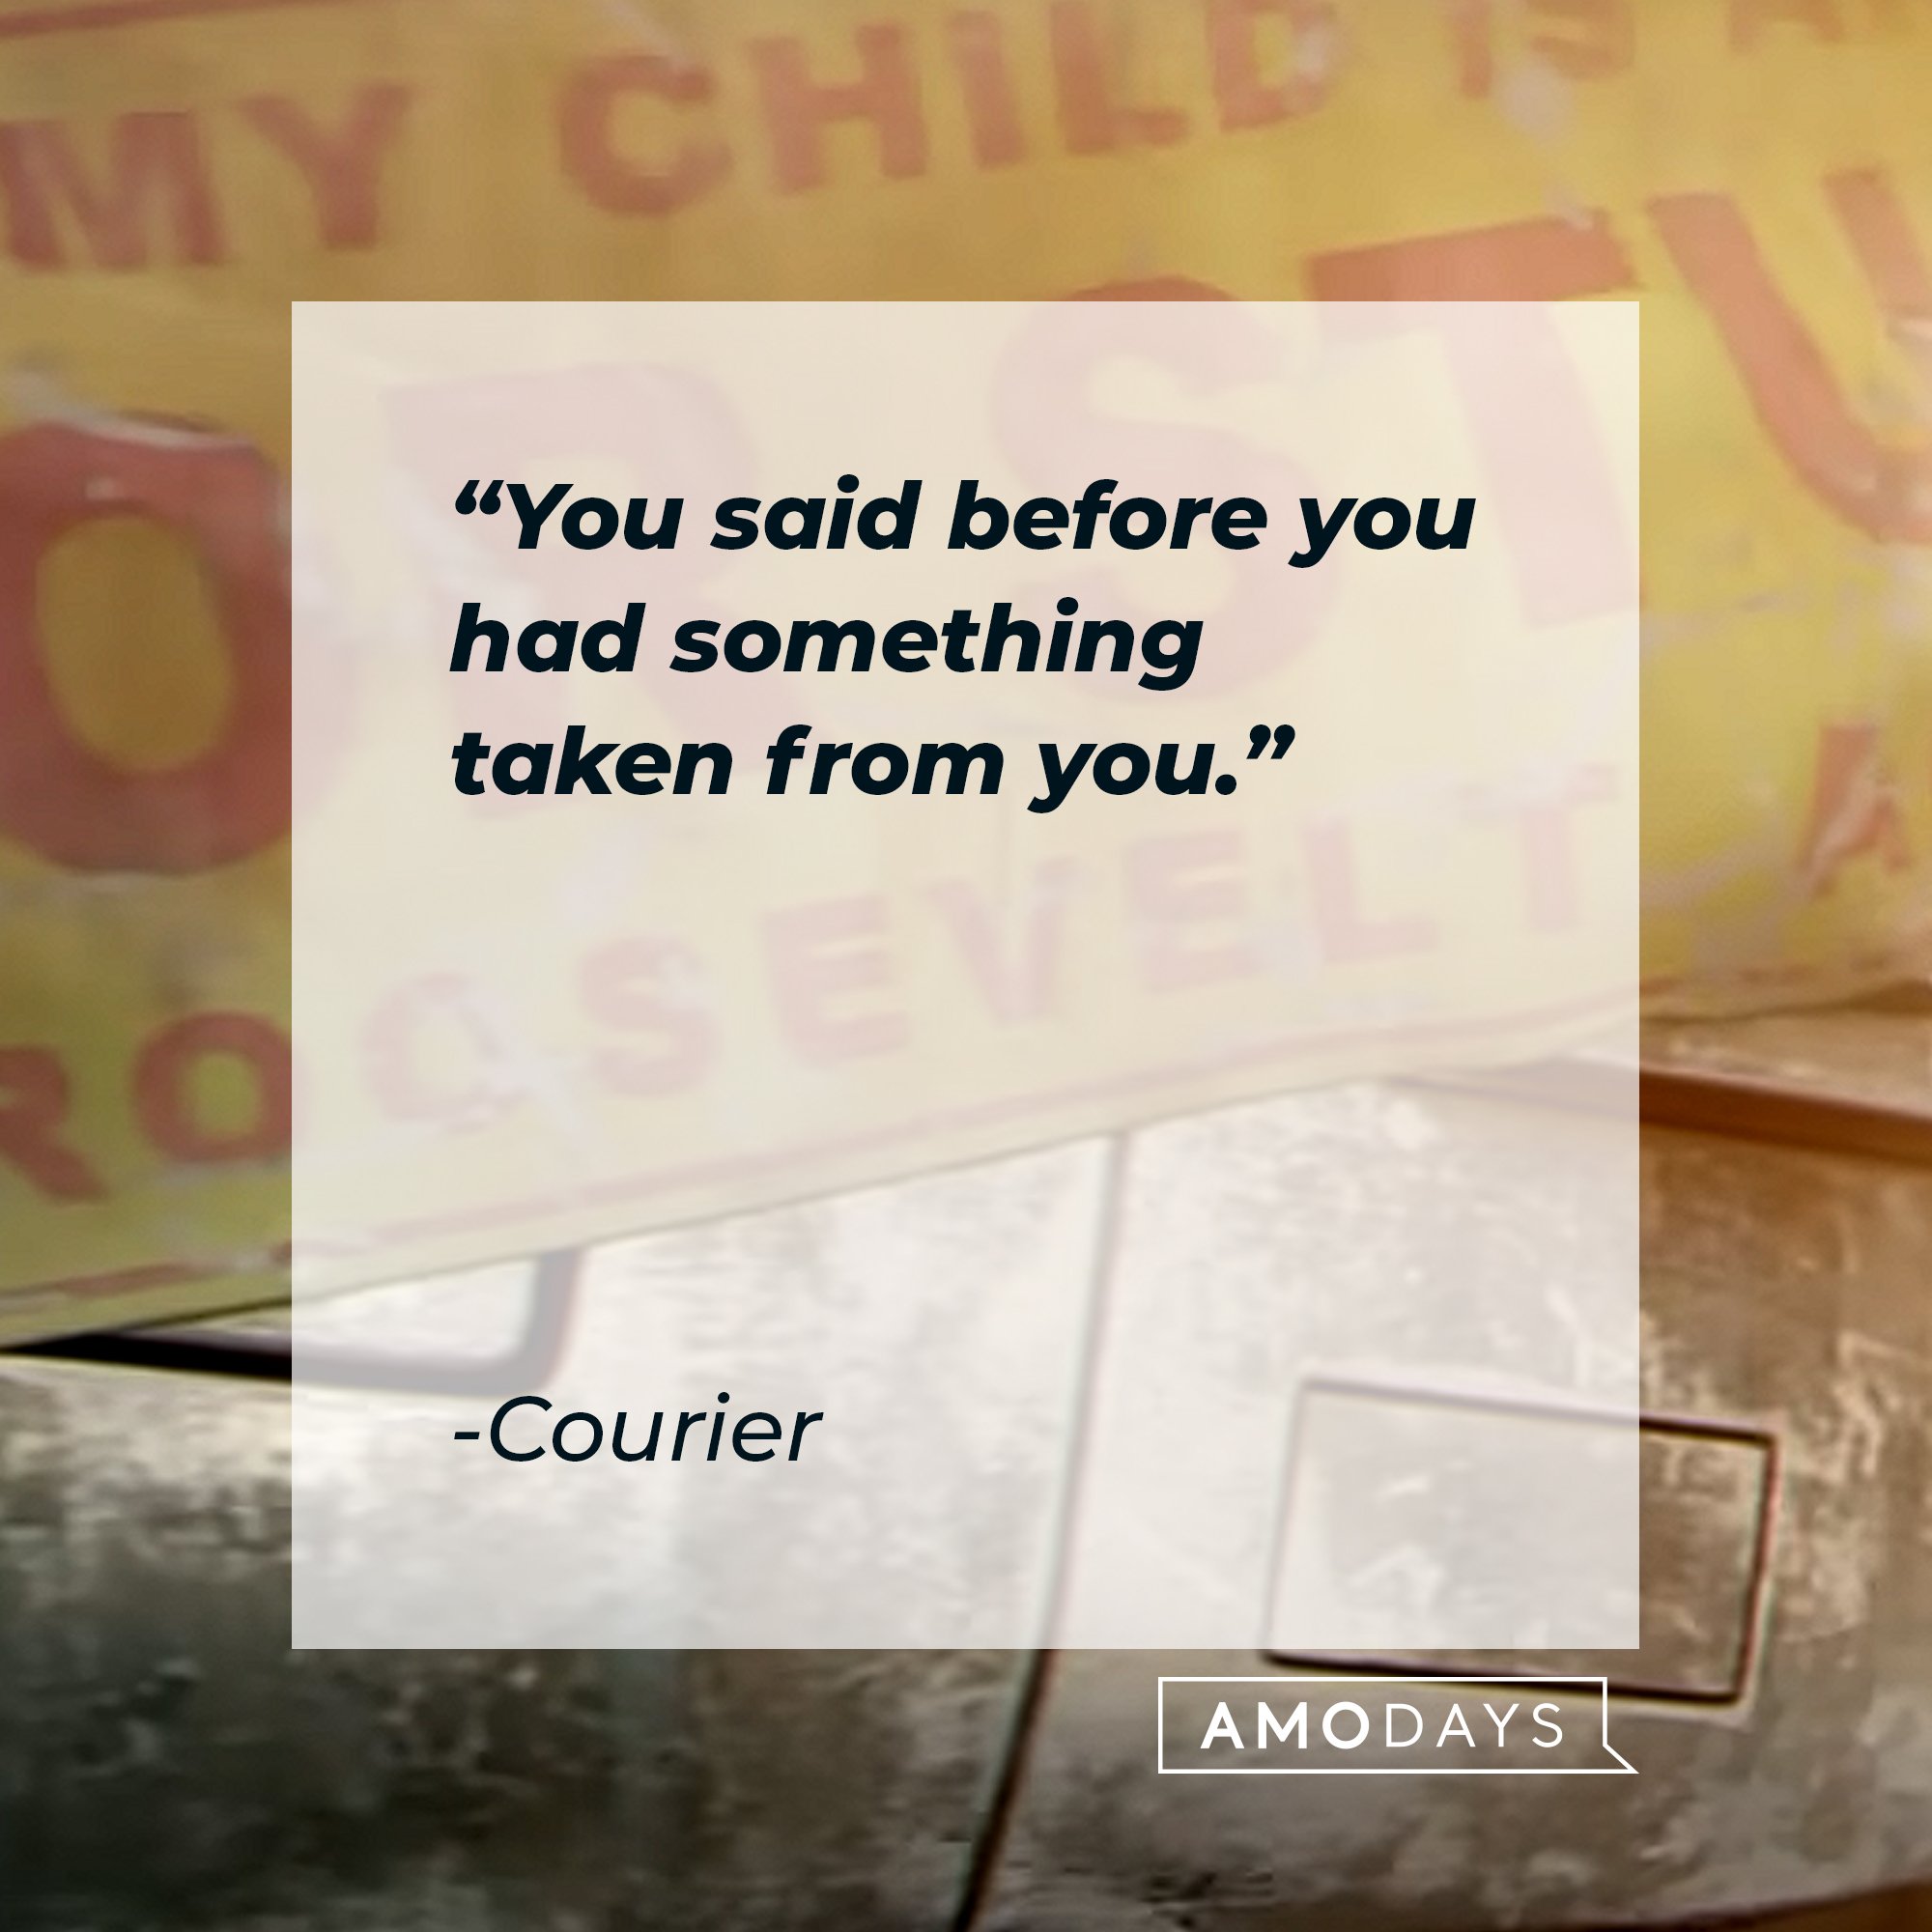 Courier’s quote: "You said before you had something taken from you."  | Image: AmoDays